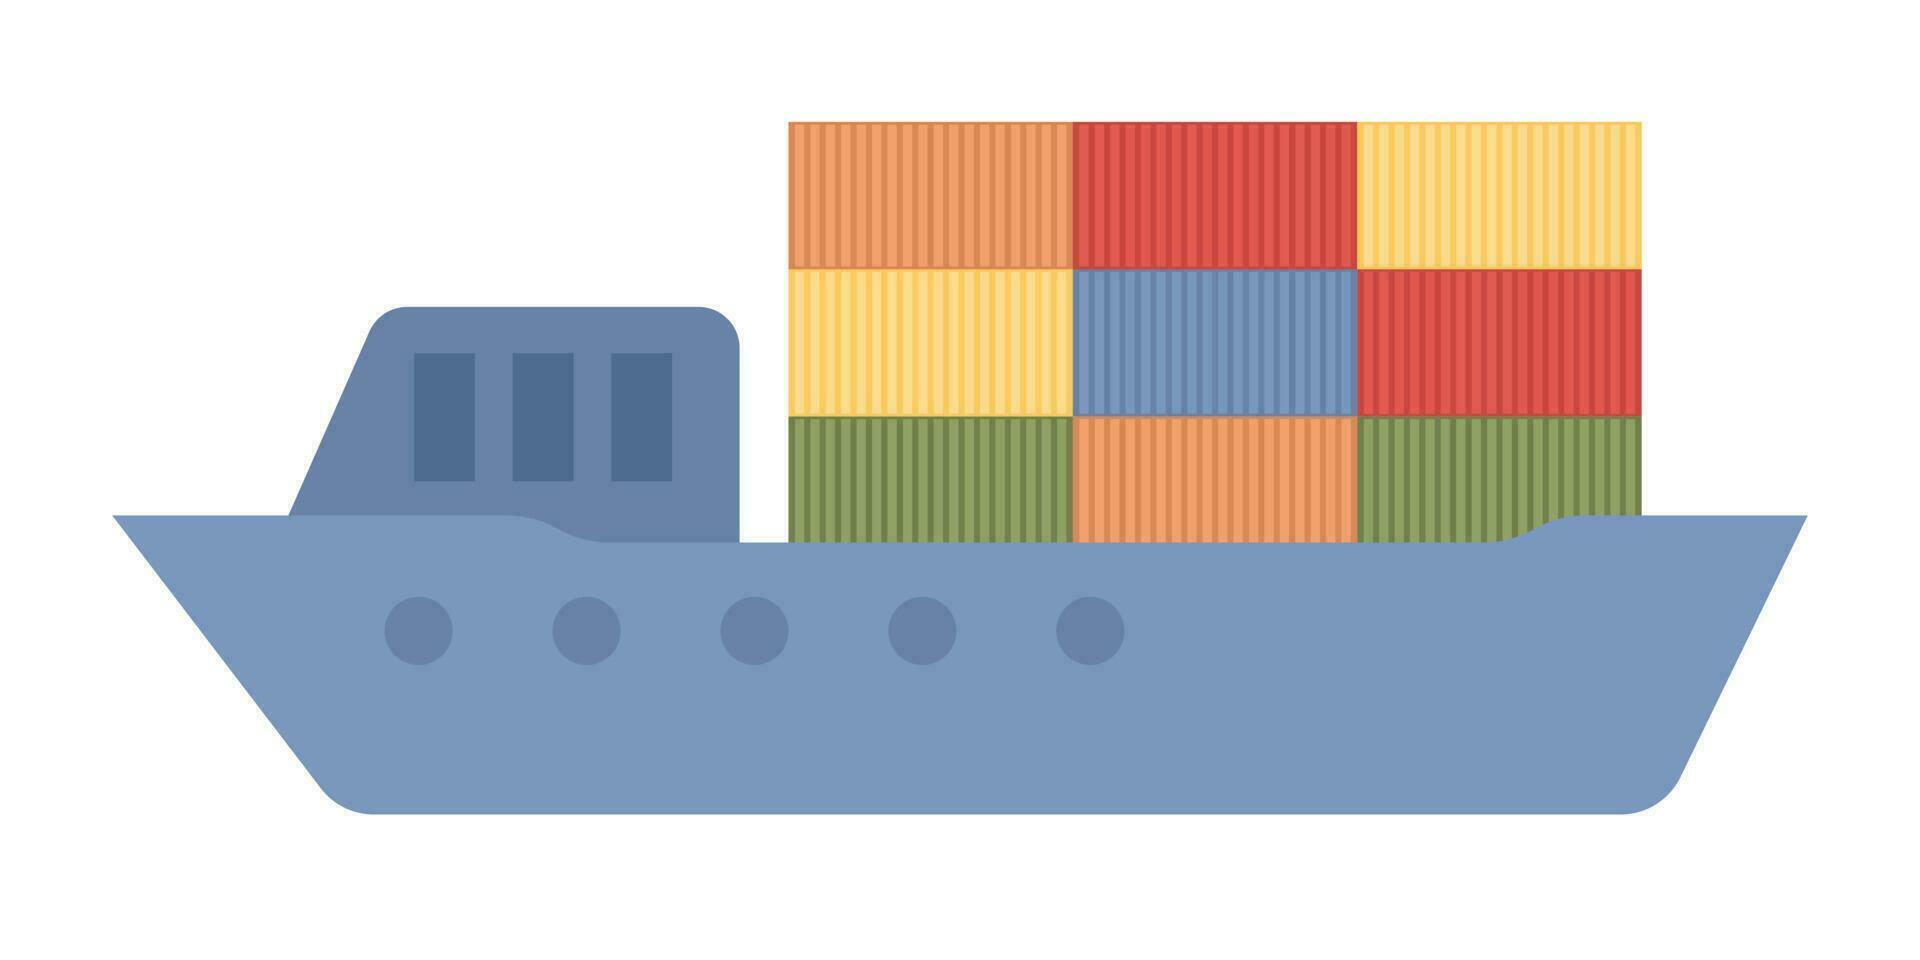 Cargo ship with colorful containers icon. Transportation sign. Global logistics concept. Vector flat illustration